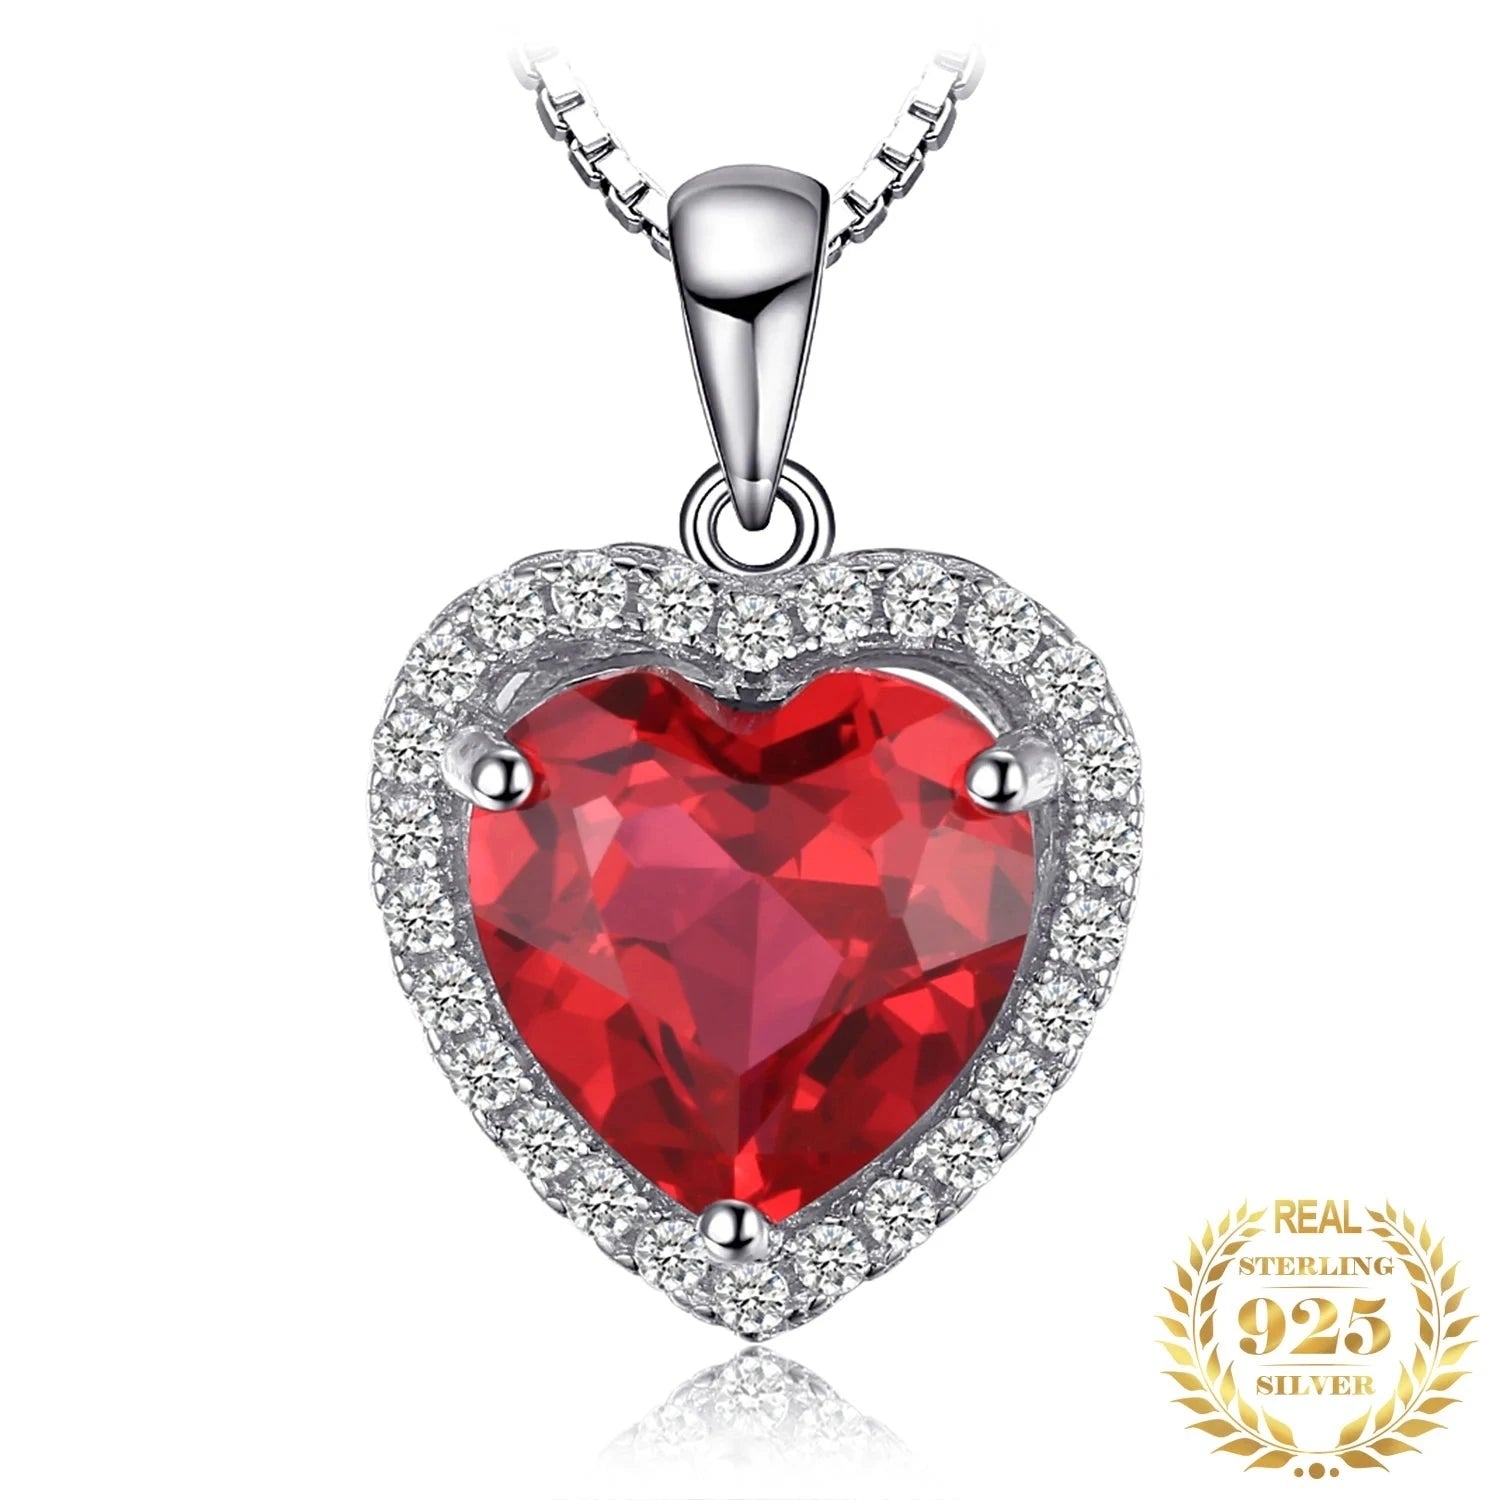 Heart Love Red Ruby 925 Sterling Silver Pendant NecklaceCHINA